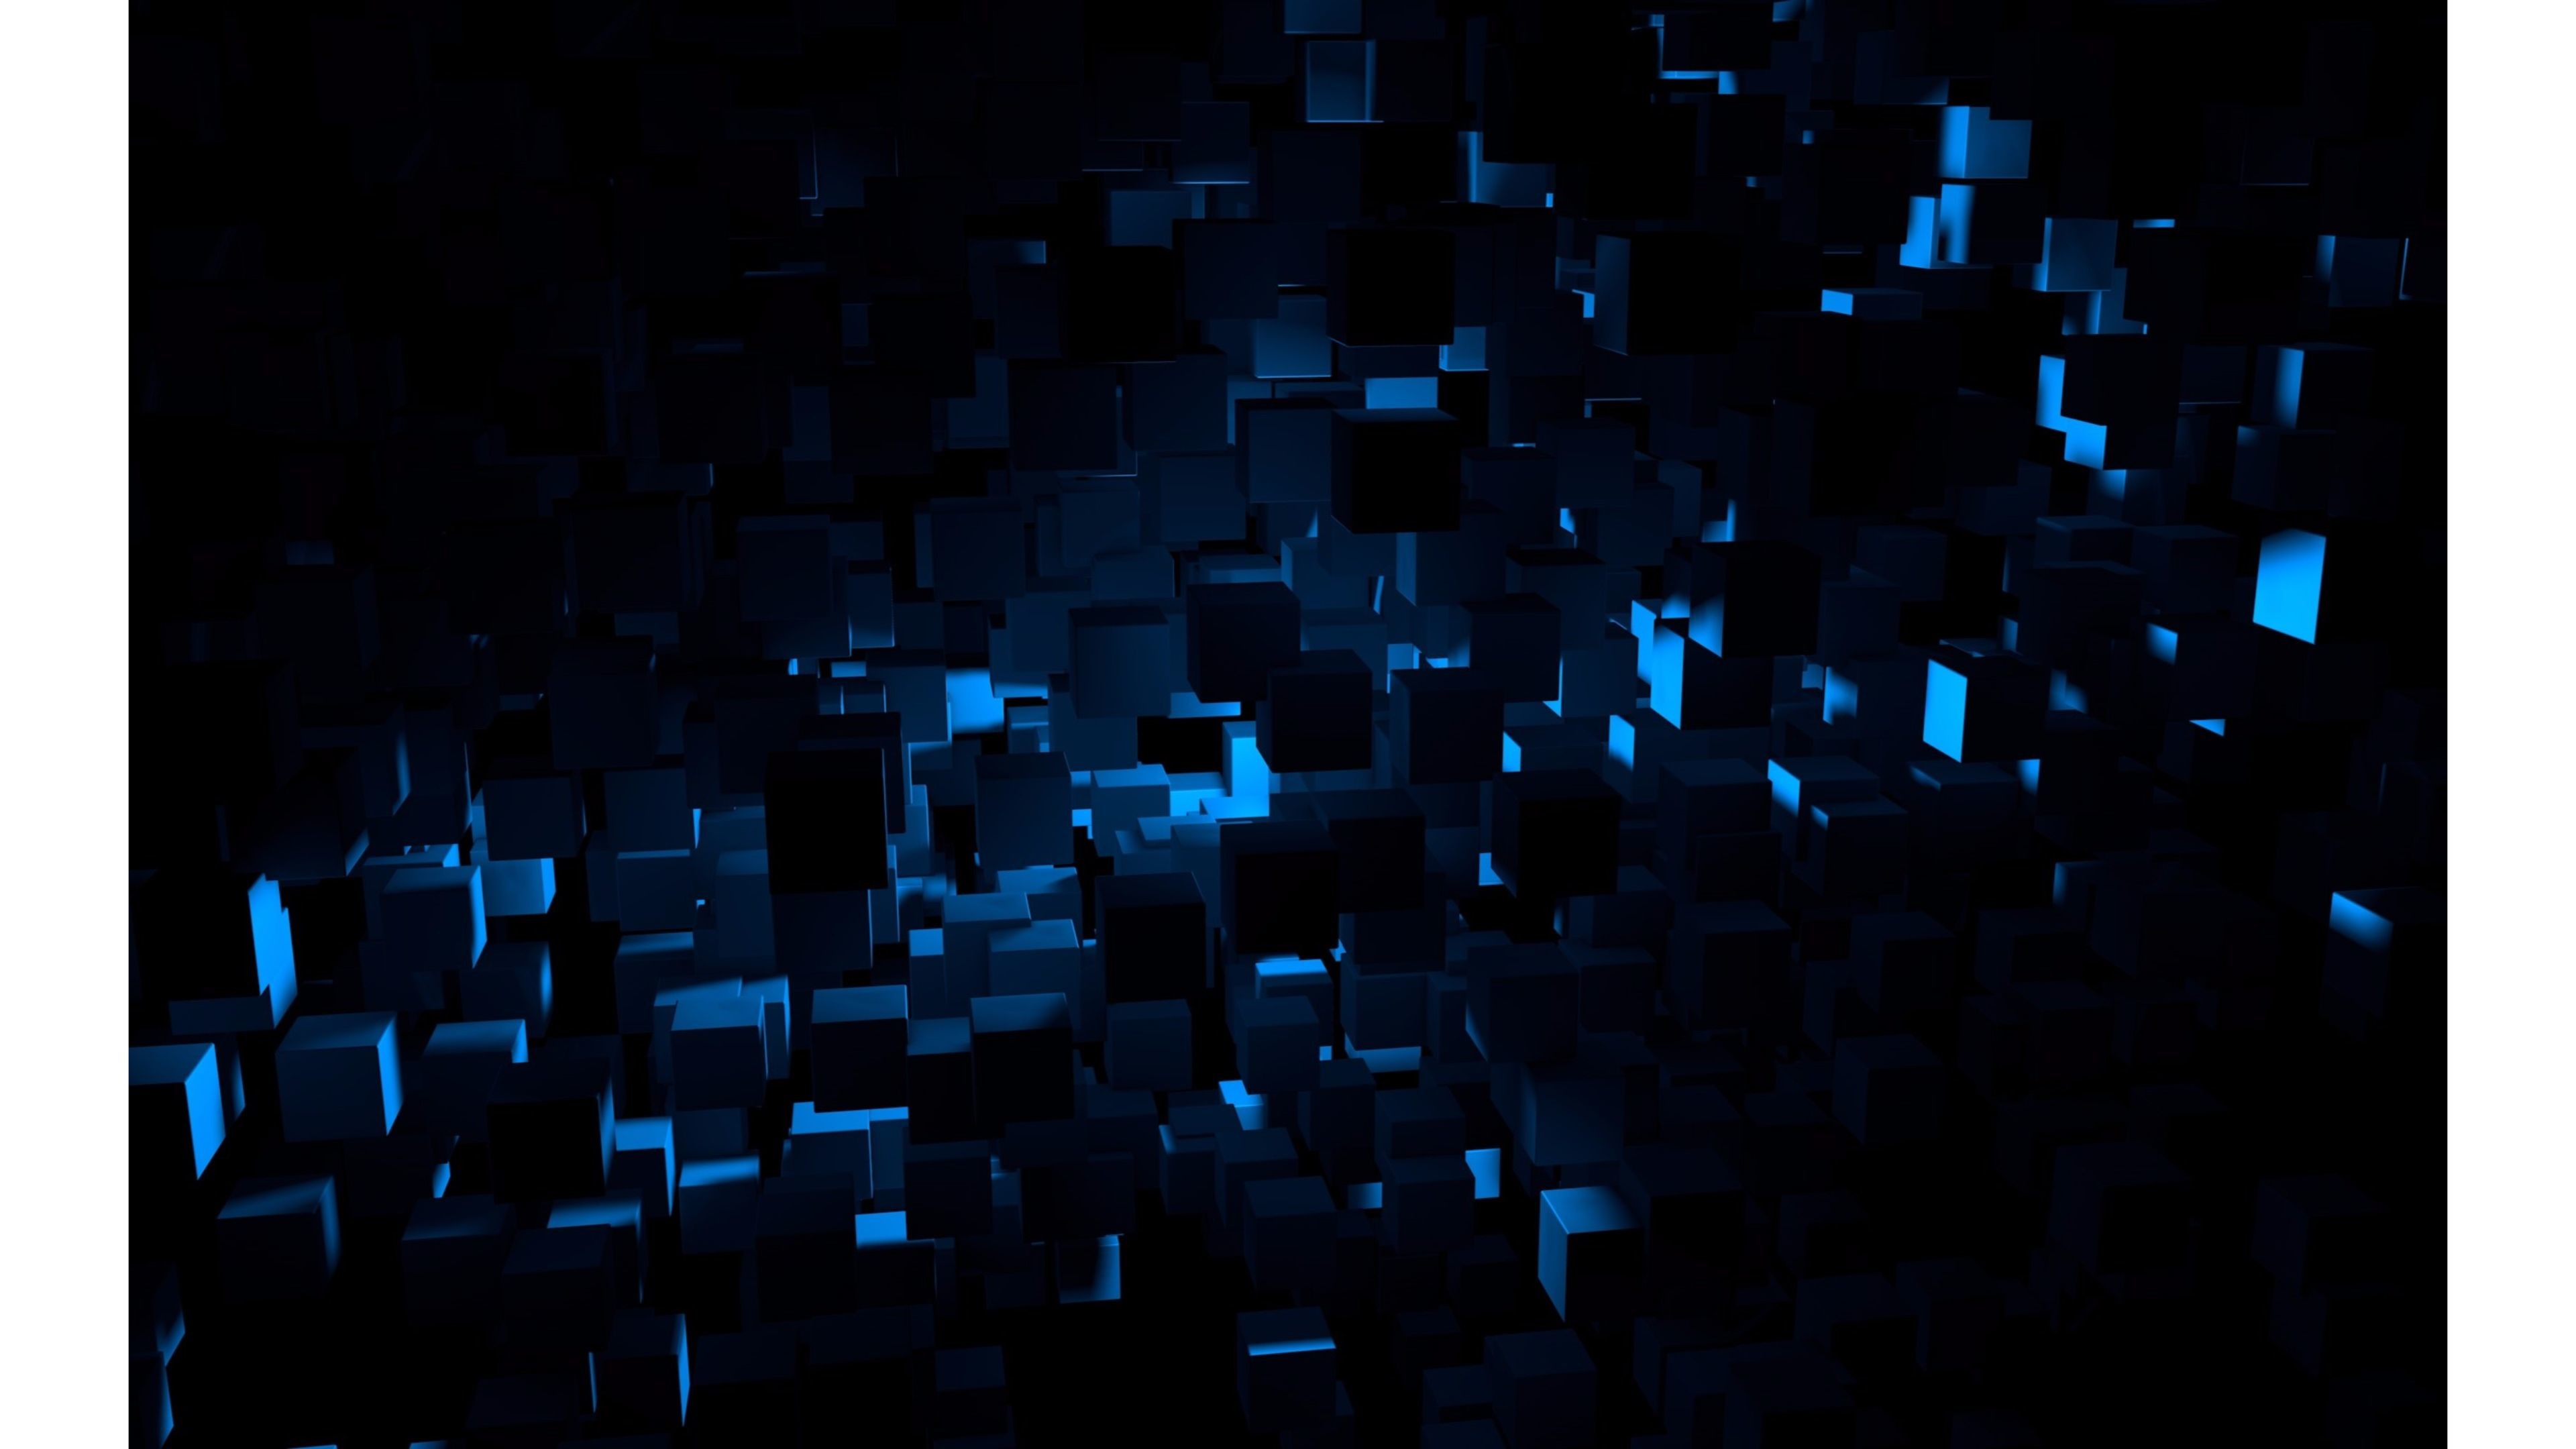 Wallpapers 4k Abstract Wallpaper Blue And Black 4k 4k Wallpaper Abstract Black 3840x2160 Wallpaper Teahub Io